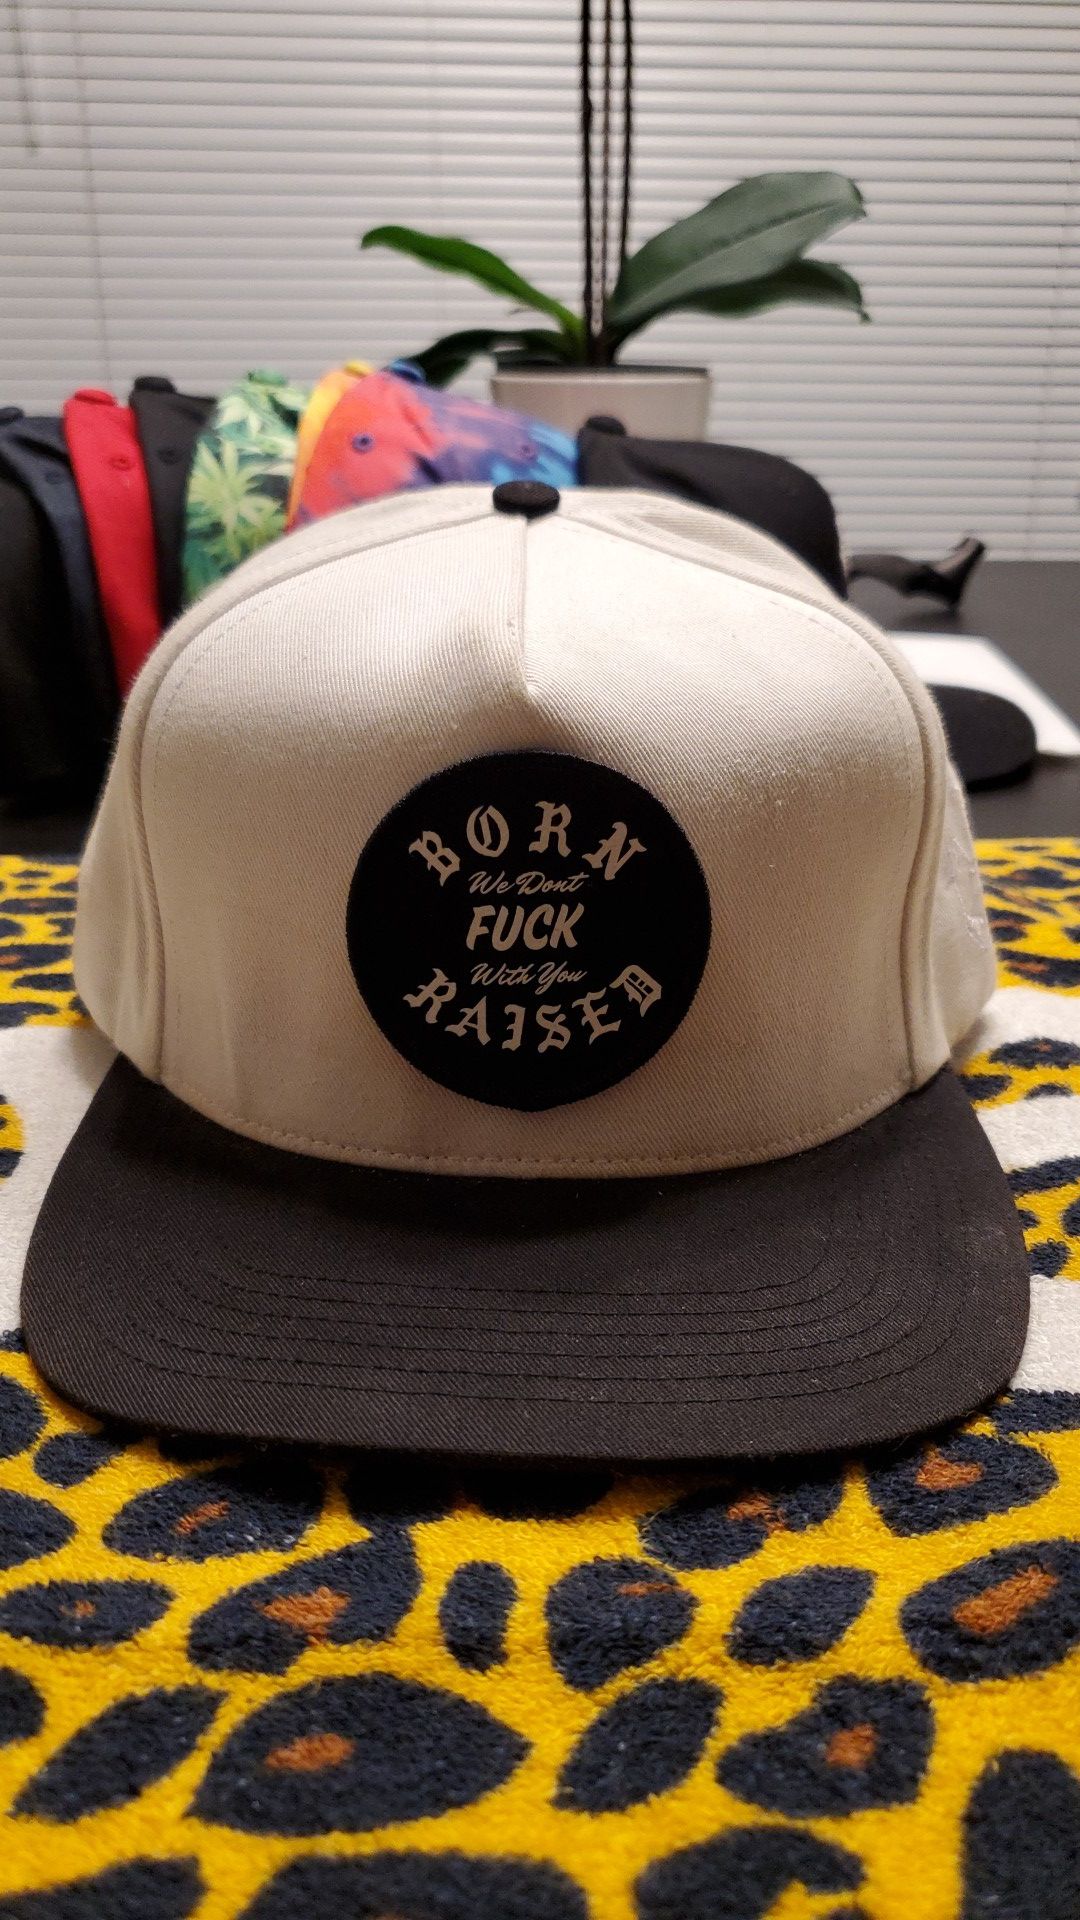 Born x Raised Snapback Hat for Sale in Beaverton, OR - OfferUp